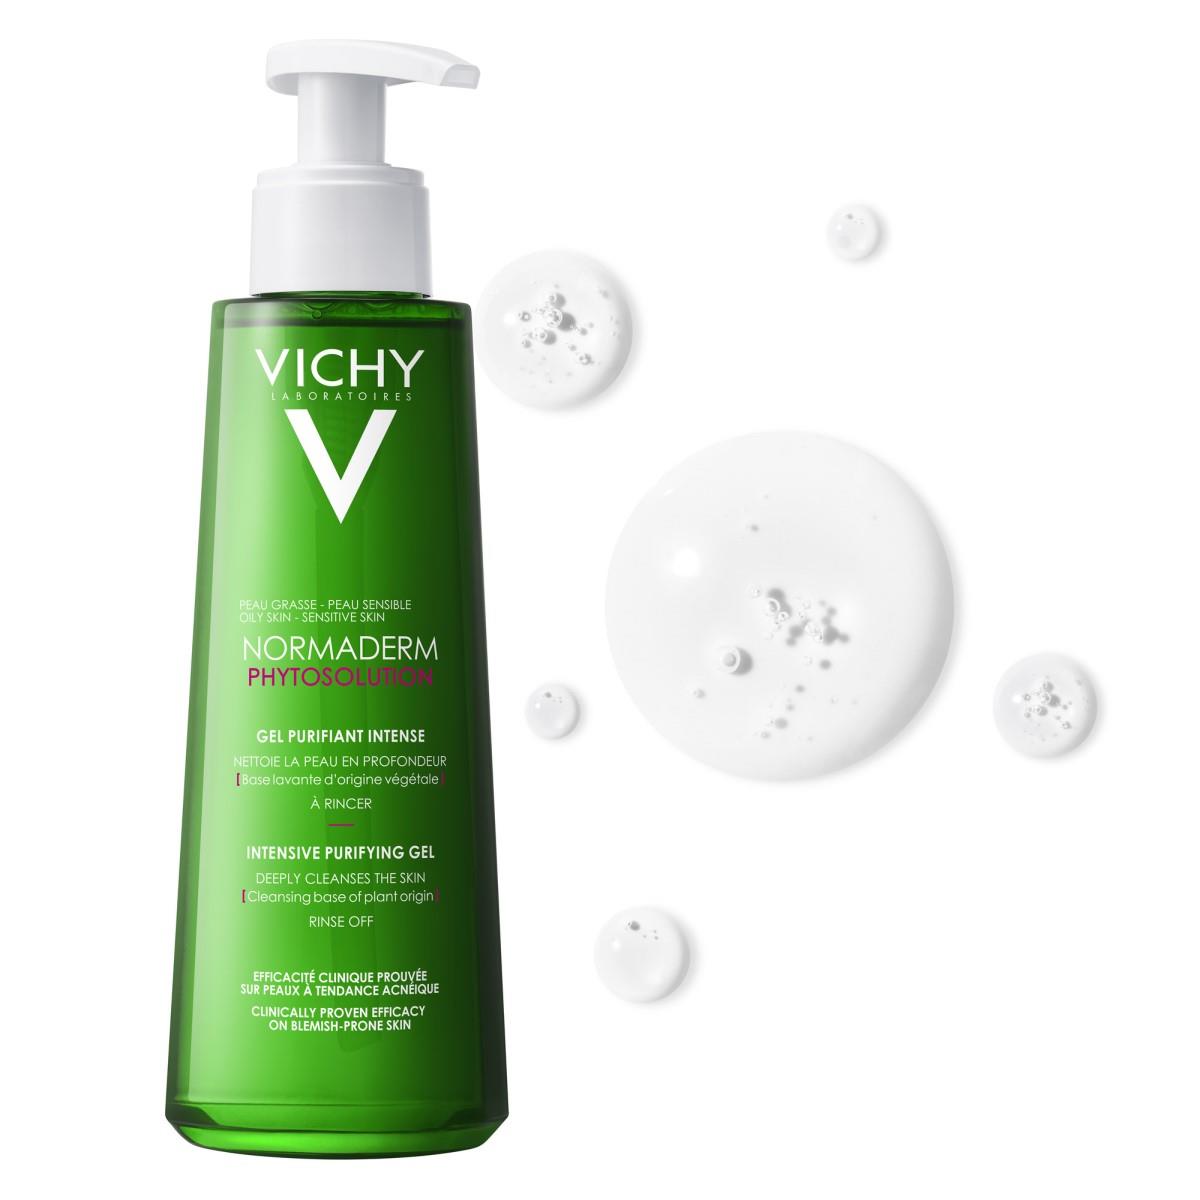 VICHY NORMADERM PHYTOSOLUTION GEL 400ML | The Glow Shop